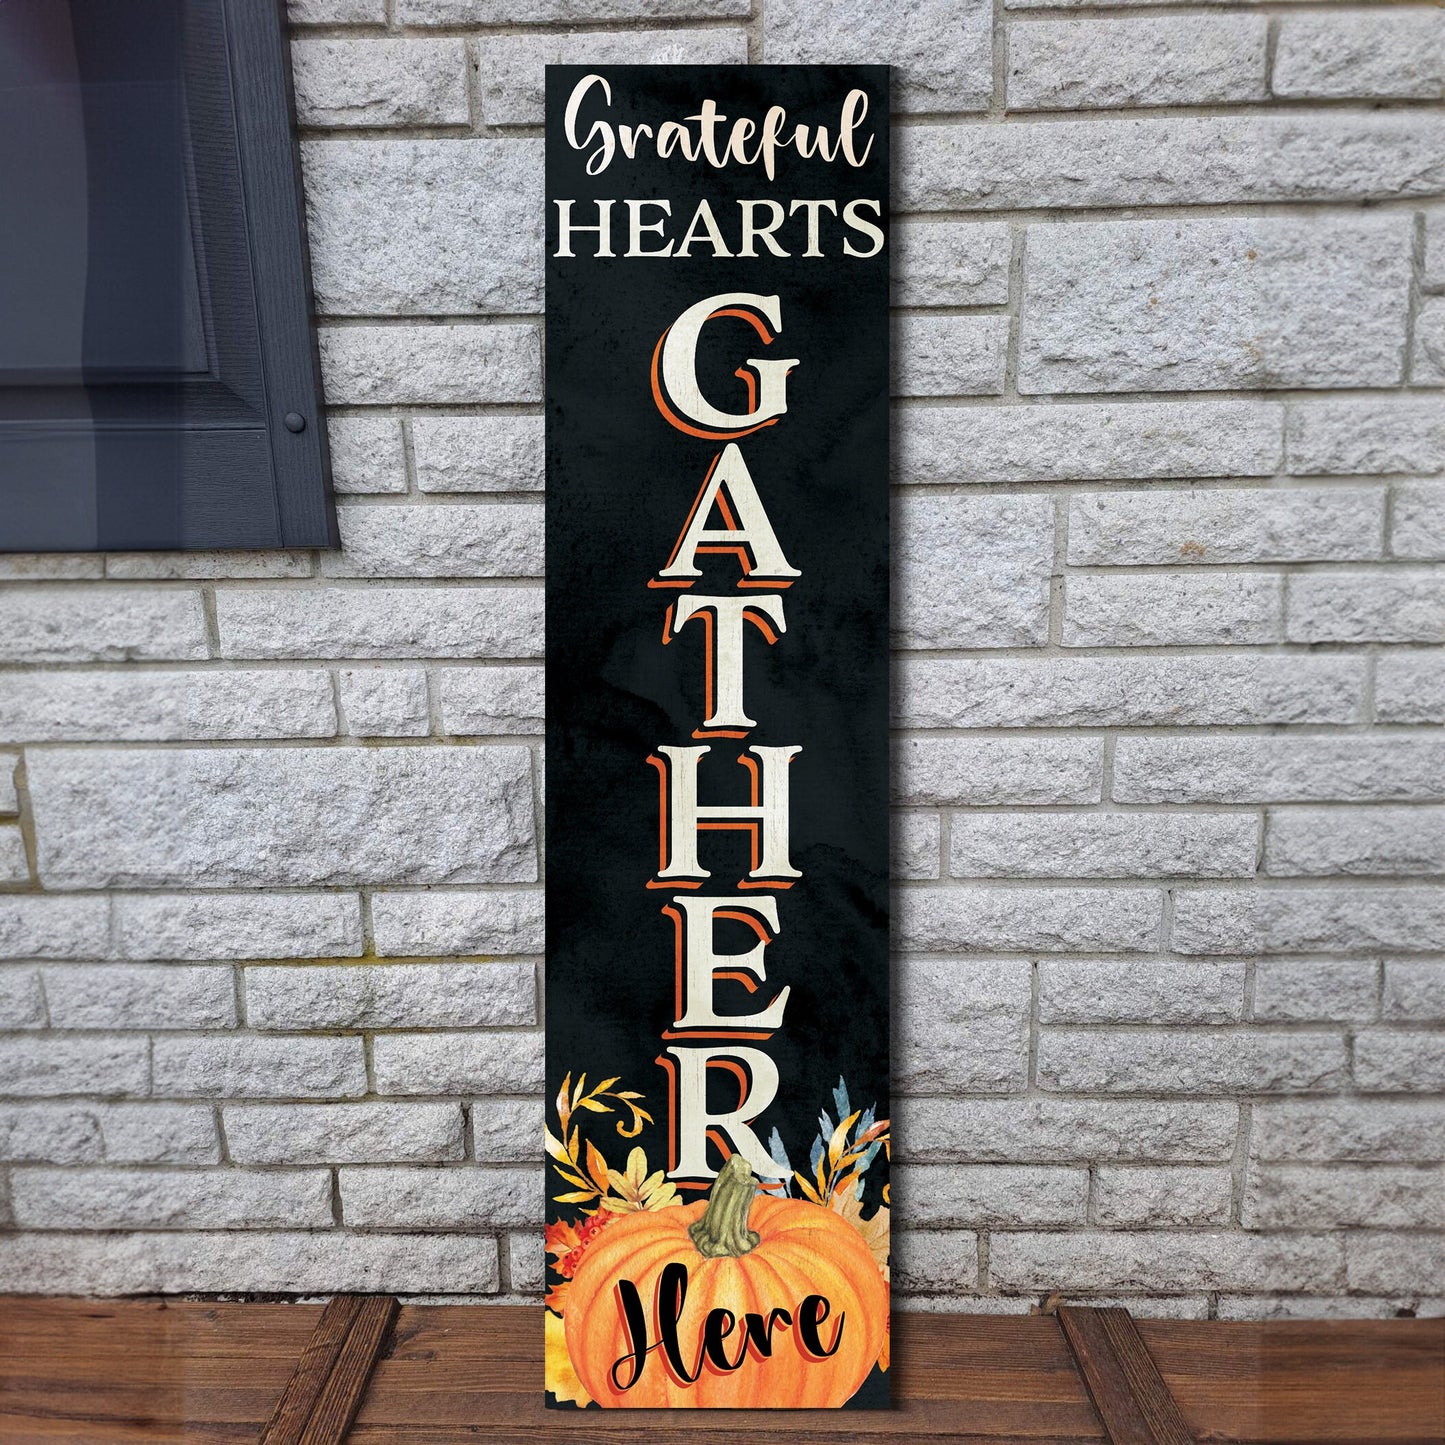 36in "Grateful Hearts Gather Here" Fall Porch Sign - Rustic Wooden Decor for Front Door Display during Autumn Celebrations